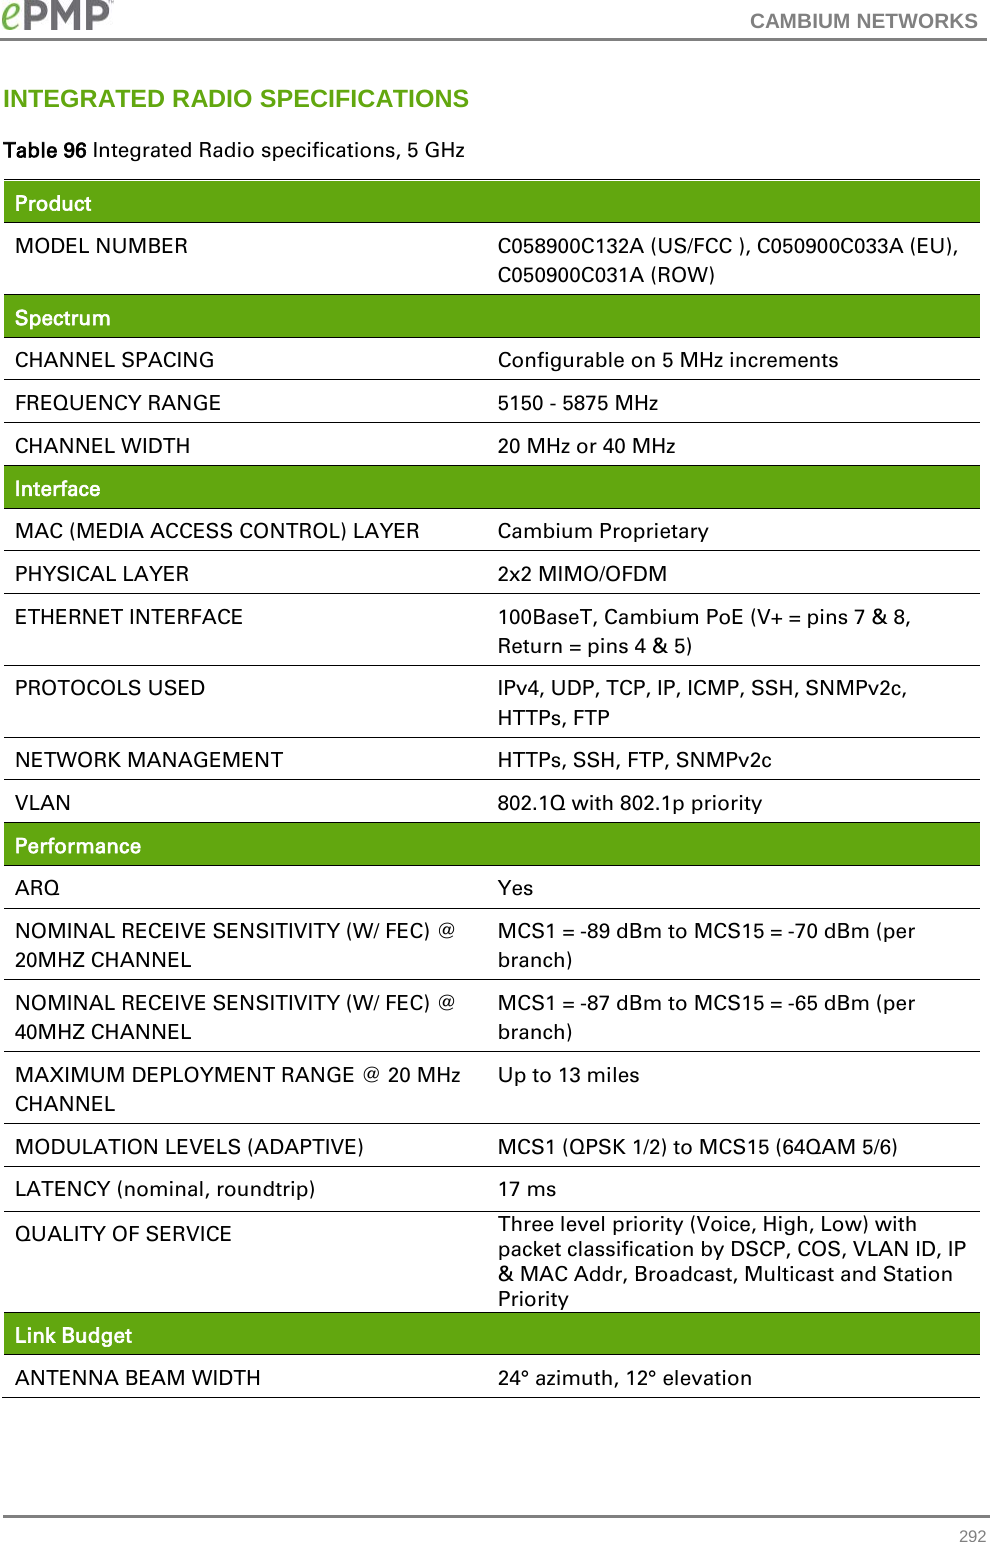 CAMBIUM NETWORKS  INTEGRATED RADIO SPECIFICATIONS Table 96 Integrated Radio specifications, 5 GHz Product  MODEL NUMBER C058900C132A (US/FCC ), C050900C033A (EU), C050900C031A (ROW) Spectrum  CHANNEL SPACING Configurable on 5 MHz increments FREQUENCY RANGE 5150 - 5875 MHz CHANNEL WIDTH 20 MHz or 40 MHz Interface  MAC (MEDIA ACCESS CONTROL) LAYER Cambium Proprietary PHYSICAL LAYER 2x2 MIMO/OFDM ETHERNET INTERFACE 100BaseT, Cambium PoE (V+ = pins 7 &amp; 8, Return = pins 4 &amp; 5) PROTOCOLS USED IPv4, UDP, TCP, IP, ICMP, SSH, SNMPv2c, HTTPs, FTP NETWORK MANAGEMENT HTTPs, SSH, FTP, SNMPv2c VLAN 802.1Q with 802.1p priority Performance  ARQ Yes NOMINAL RECEIVE SENSITIVITY (W/ FEC) @ 20MHZ CHANNEL MCS1 = -89 dBm to MCS15 = -70 dBm (per branch) NOMINAL RECEIVE SENSITIVITY (W/ FEC) @ 40MHZ CHANNEL MCS1 = -87 dBm to MCS15 = -65 dBm (per branch) MAXIMUM DEPLOYMENT RANGE @ 20 MHz CHANNEL Up to 13 miles MODULATION LEVELS (ADAPTIVE) MCS1 (QPSK 1/2) to MCS15 (64QAM 5/6) LATENCY (nominal, roundtrip) 17 ms QUALITY OF SERVICE Three level priority (Voice, High, Low) with packet classification by DSCP, COS, VLAN ID, IP &amp; MAC Addr, Broadcast, Multicast and Station Priority Link Budget  ANTENNA BEAM WIDTH 24° azimuth, 12° elevation  292 